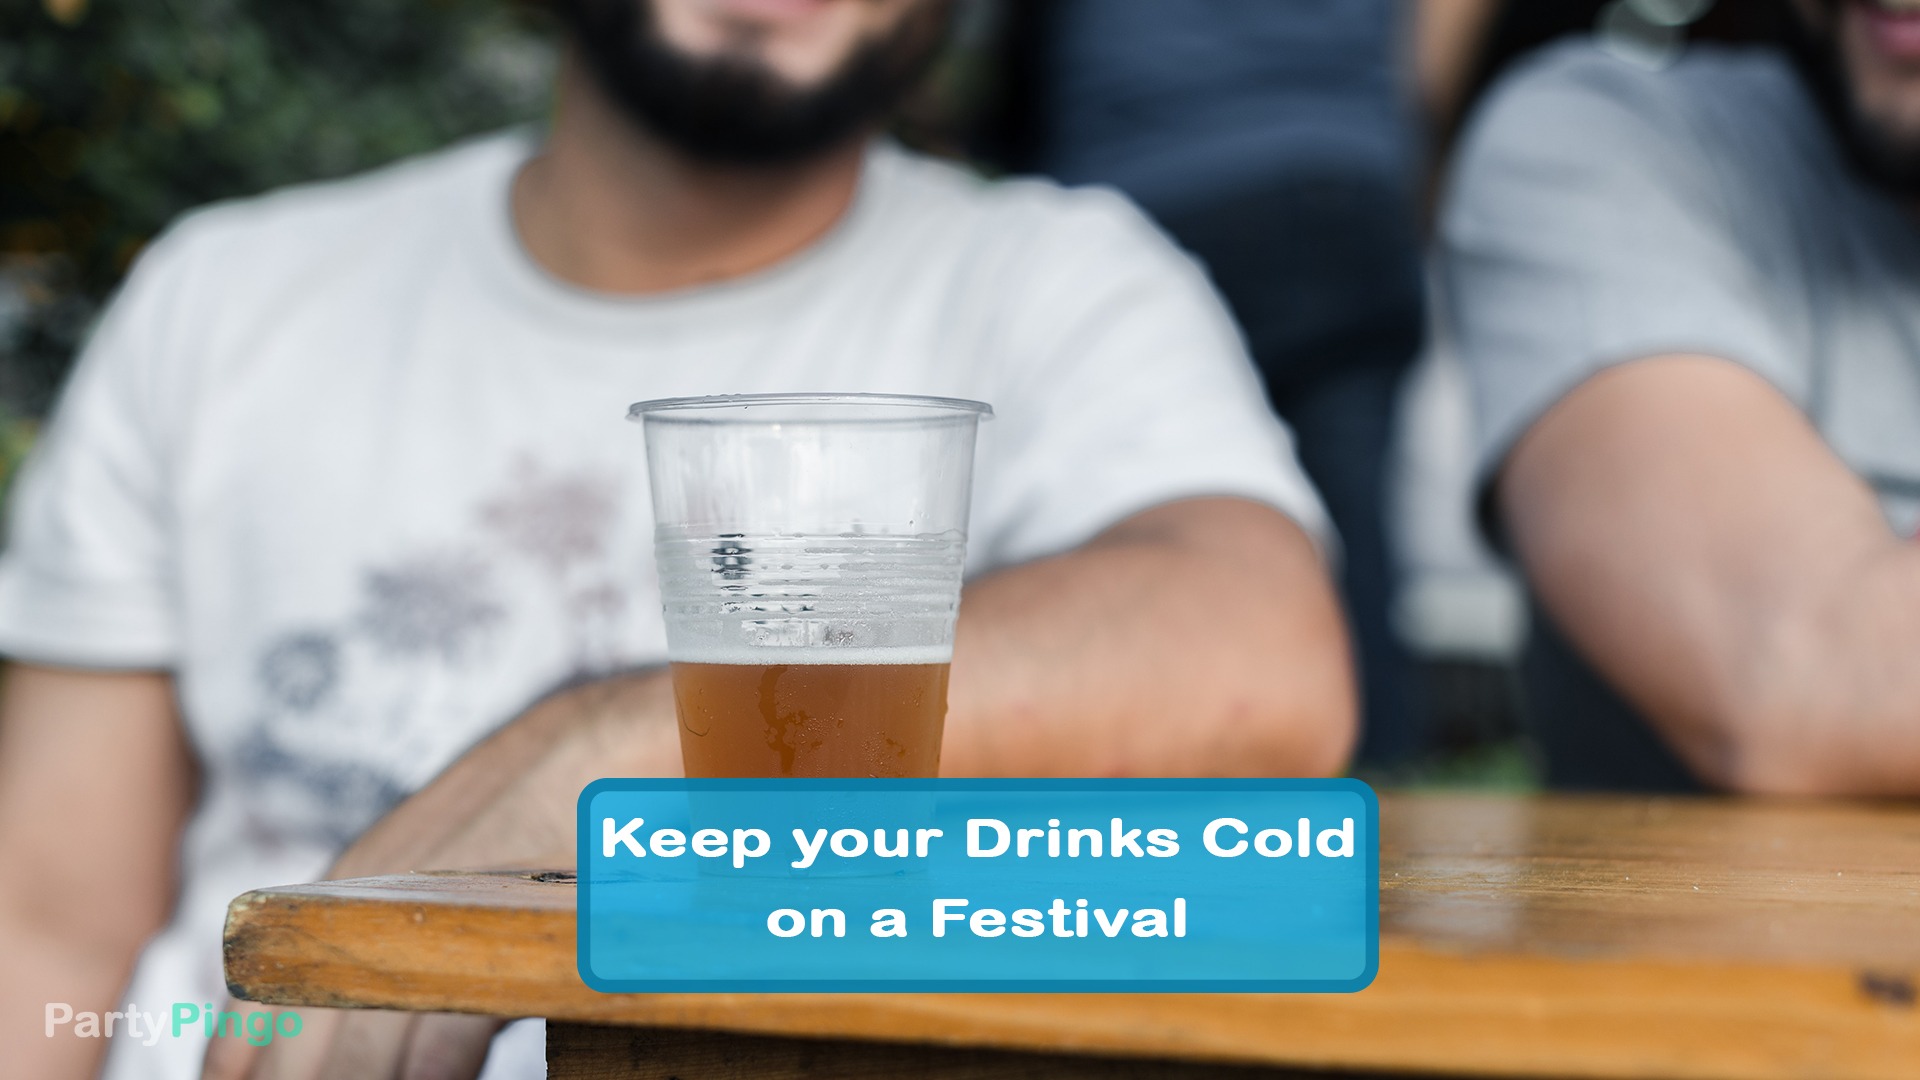 How to keep your Drinks Cold on a Festival